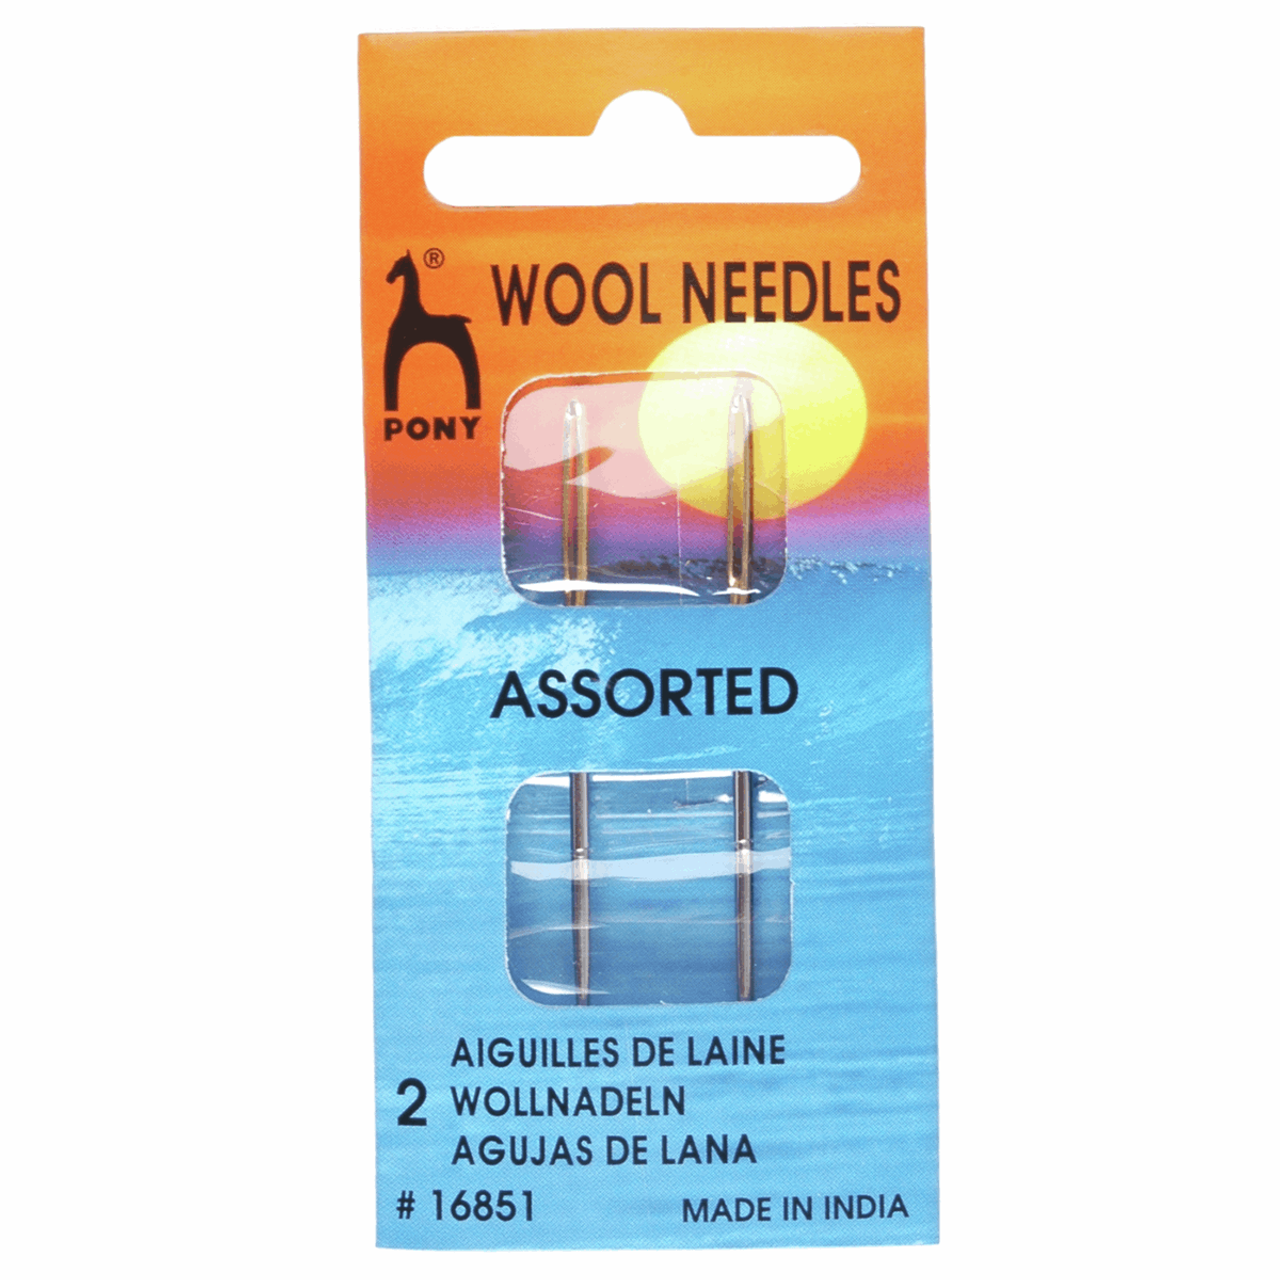 Hand Sewing Needles - Wool - 2 Sizes